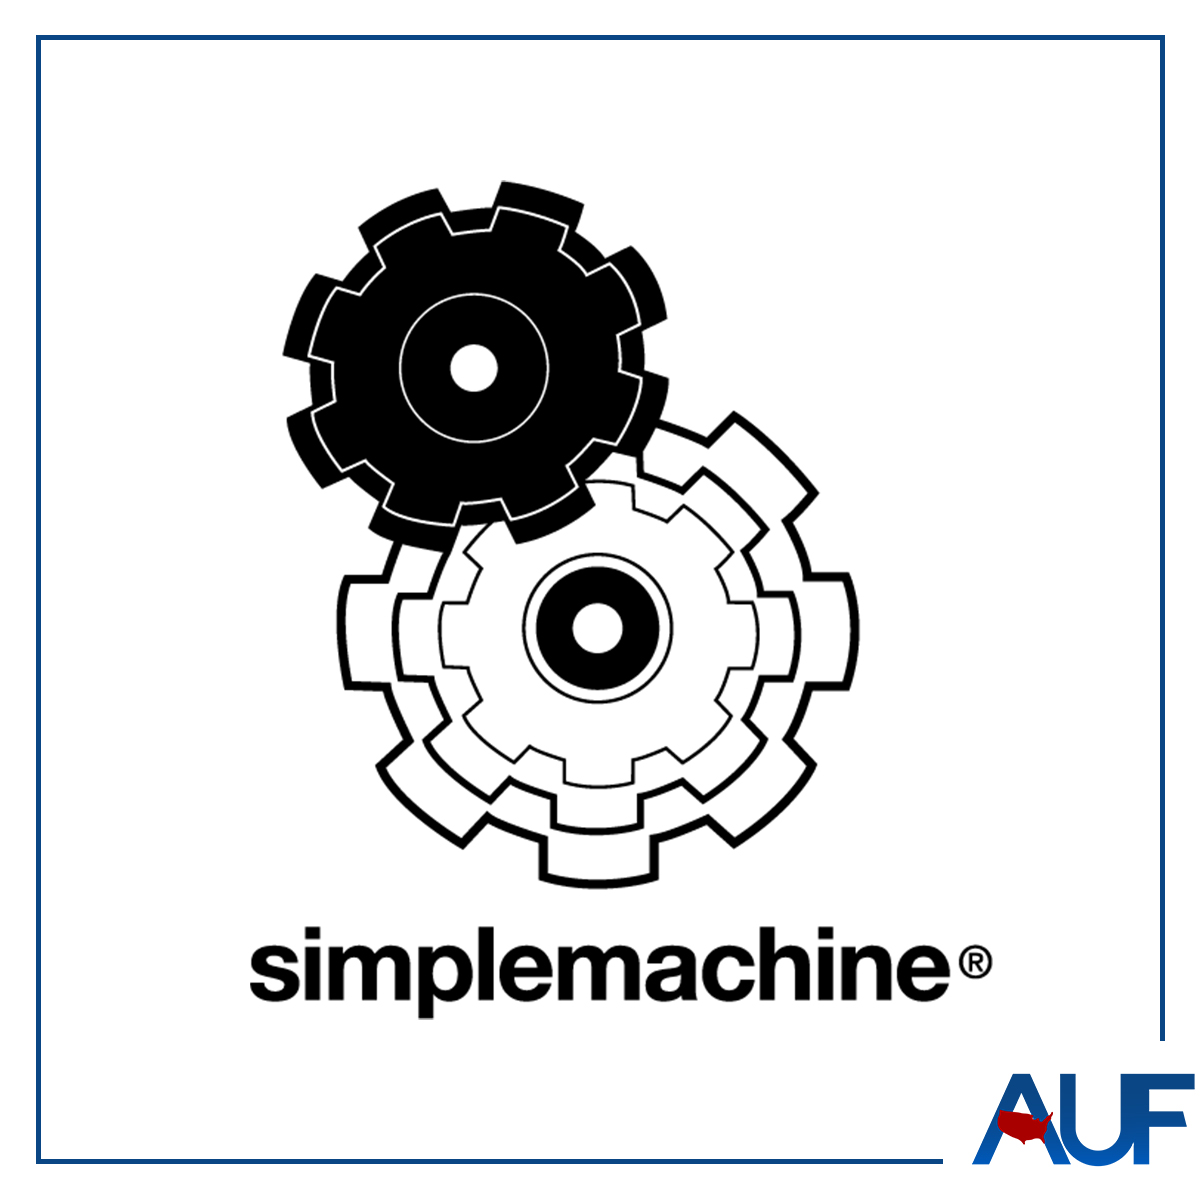 Multiple Pictures: Simplemachine